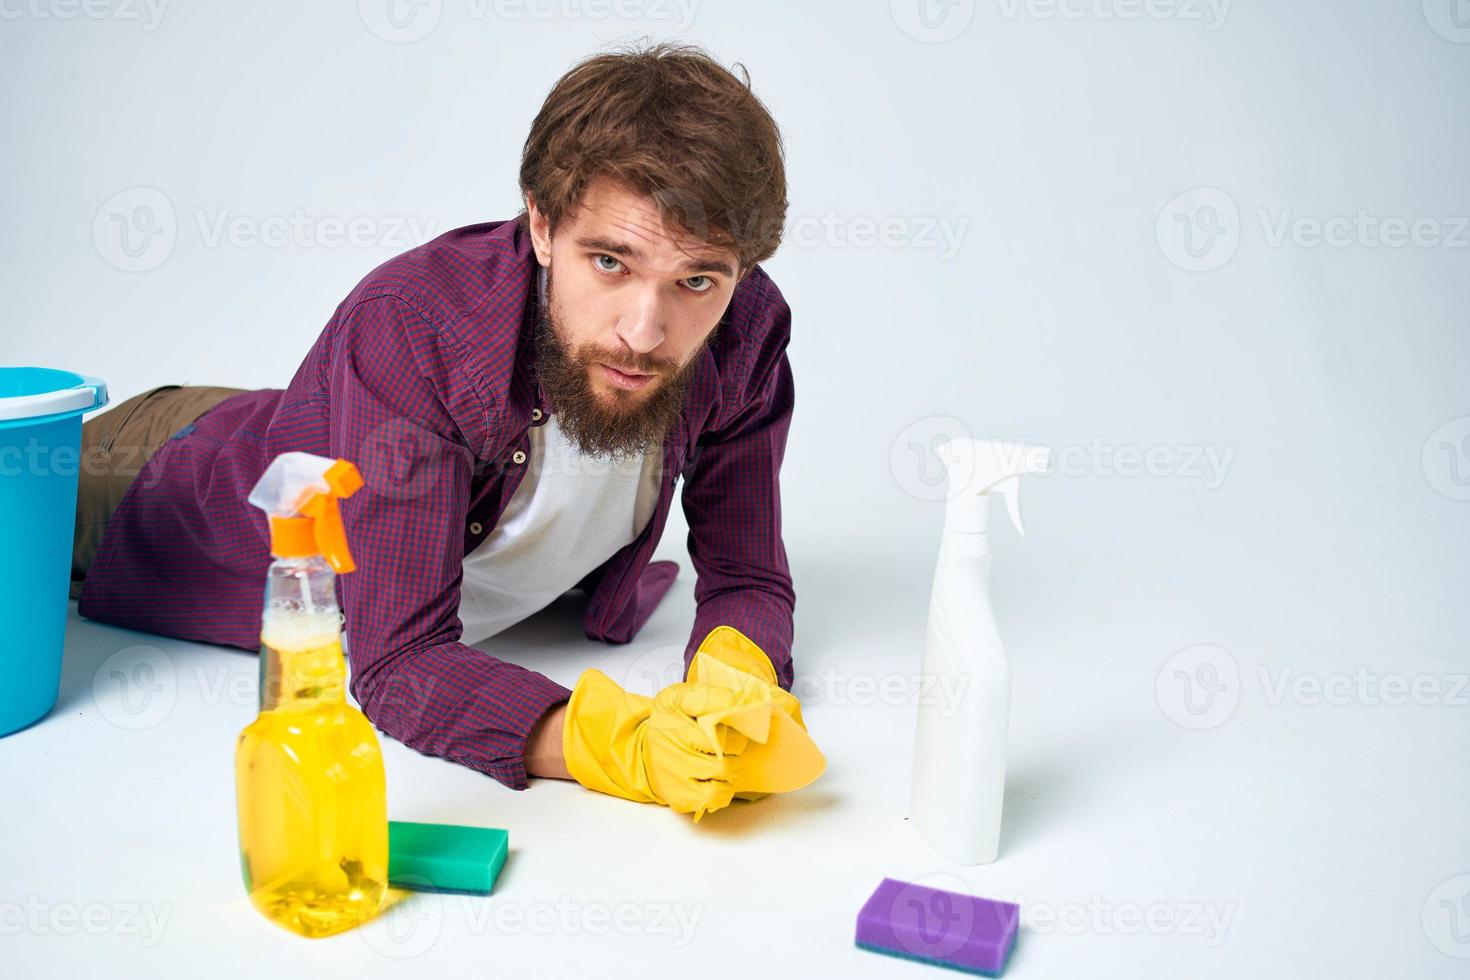 man with a bucket on the floor detergent service lifestyle photo